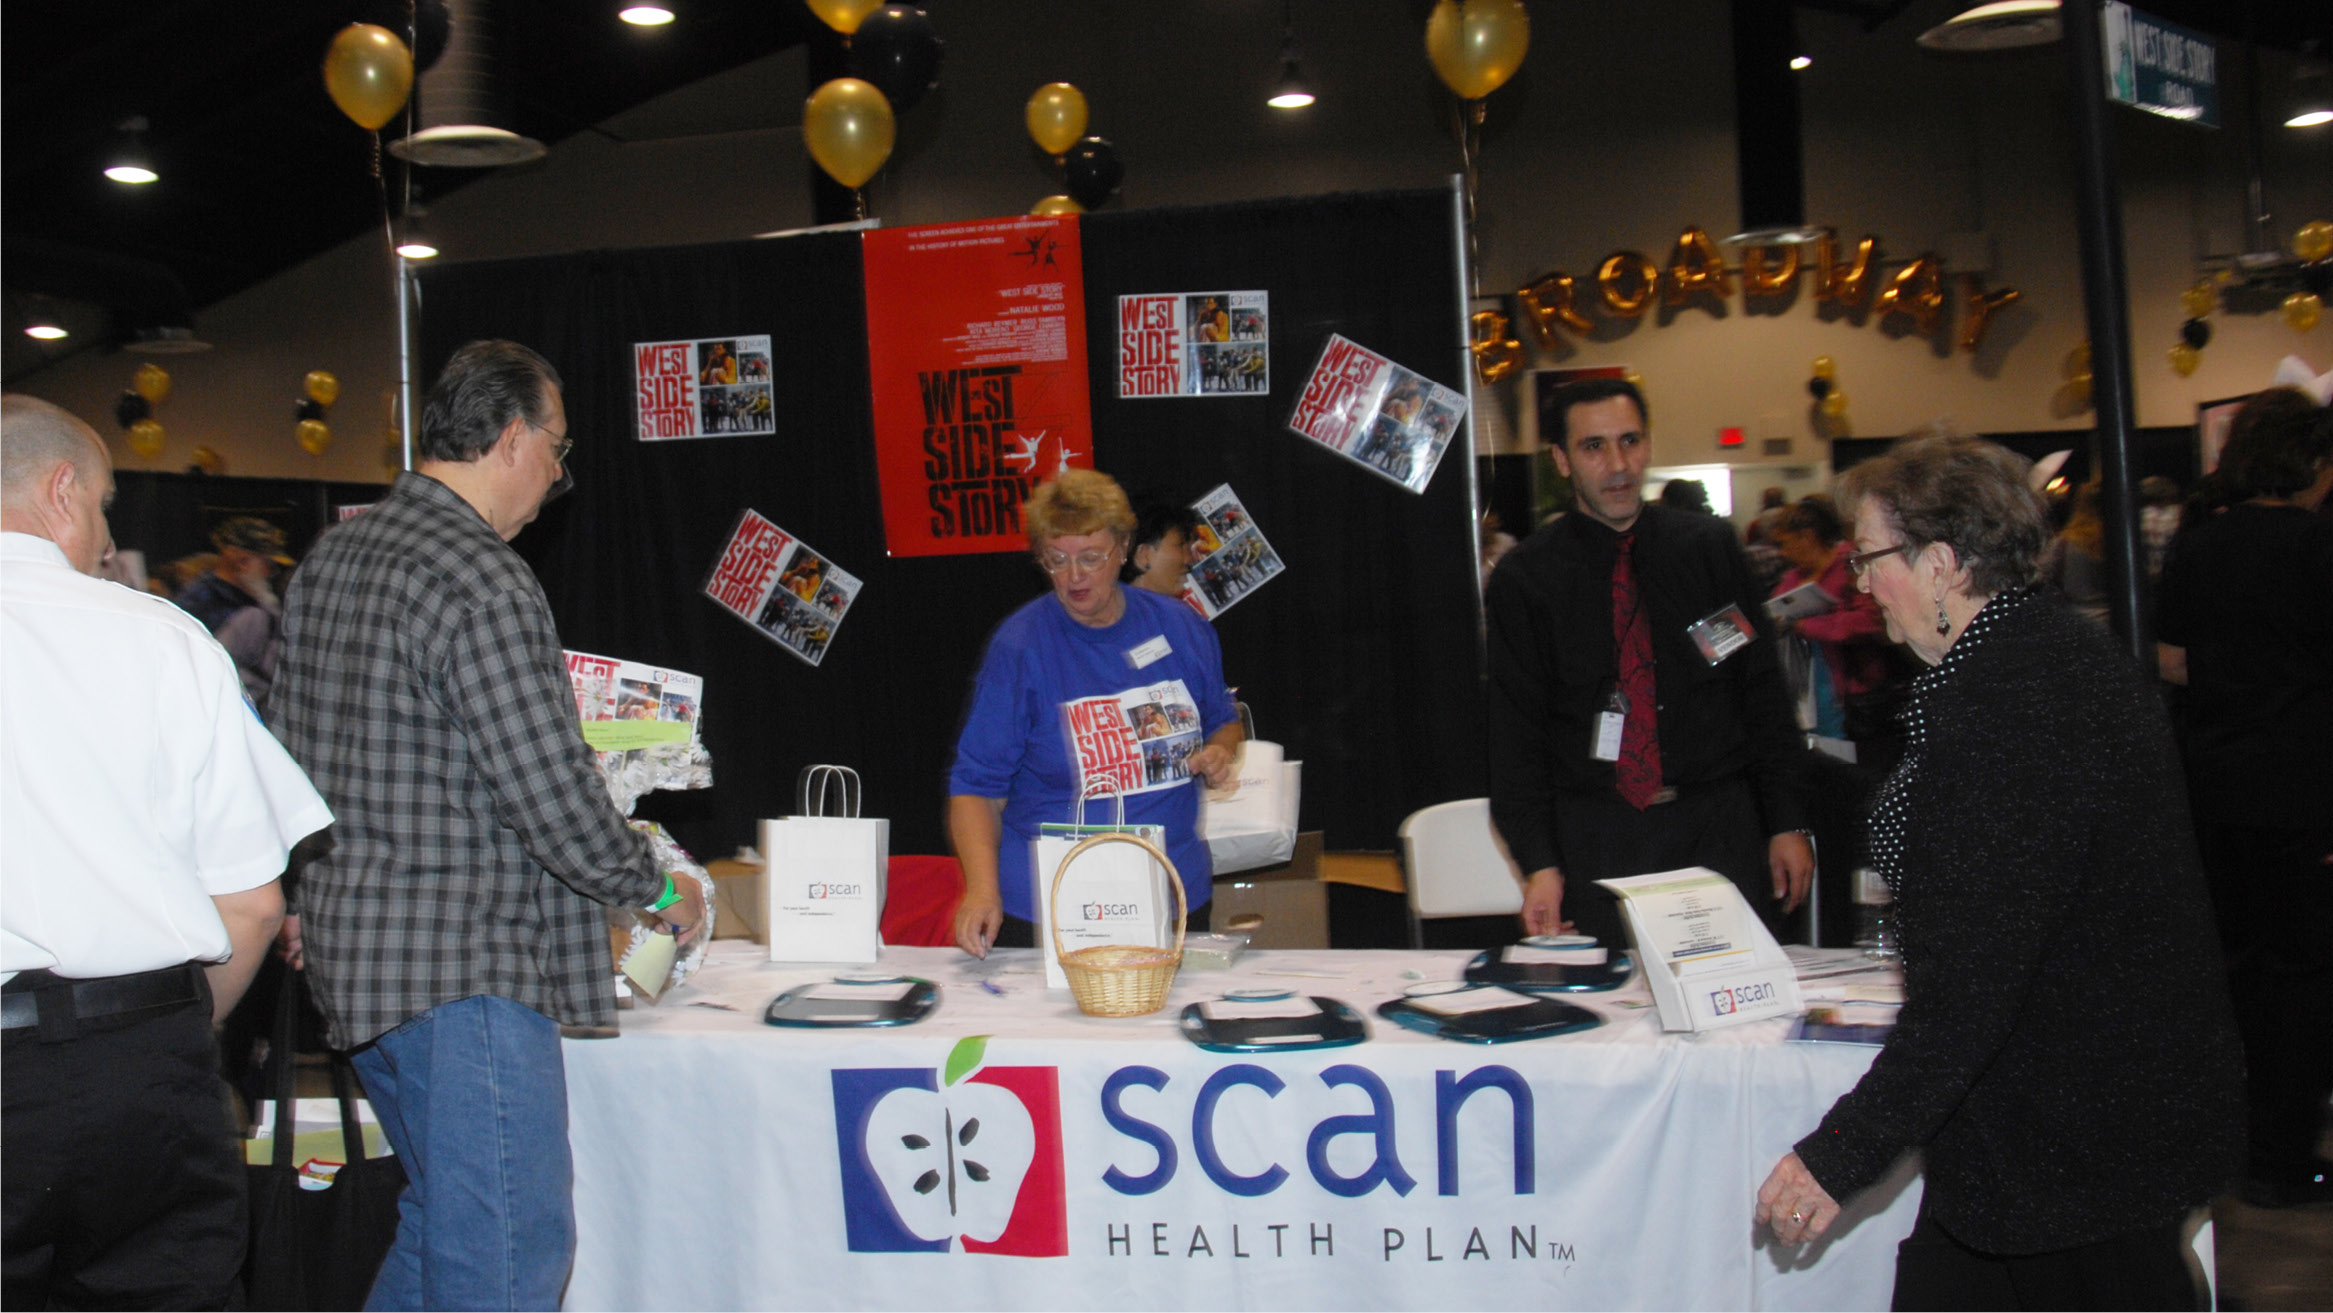 SCAN Health Plan booth